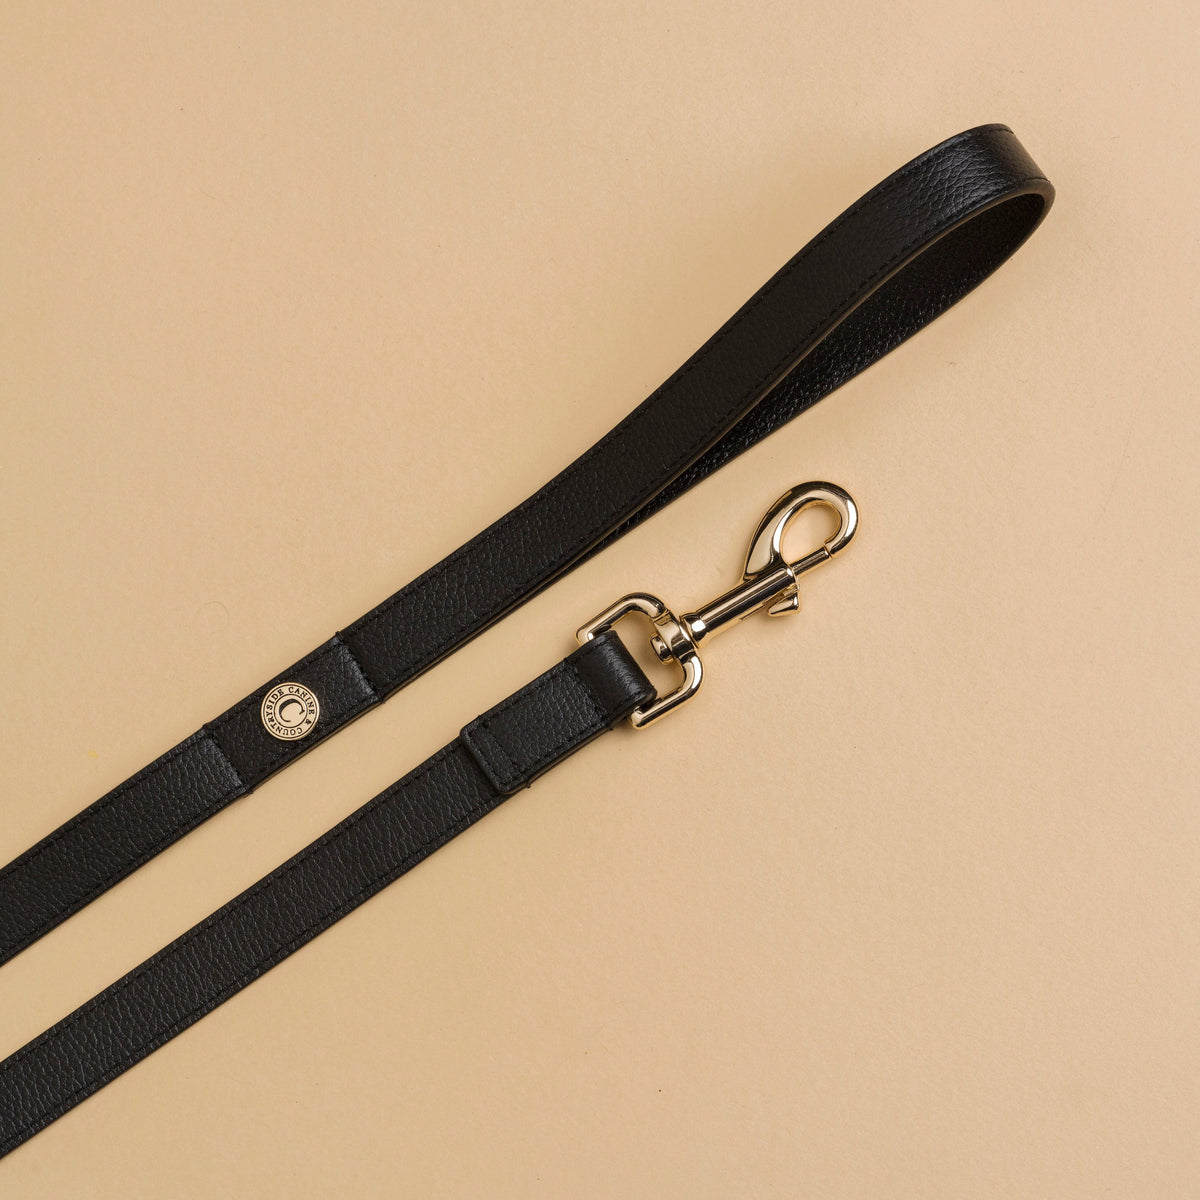 Leather Collar and Lead Set - Black